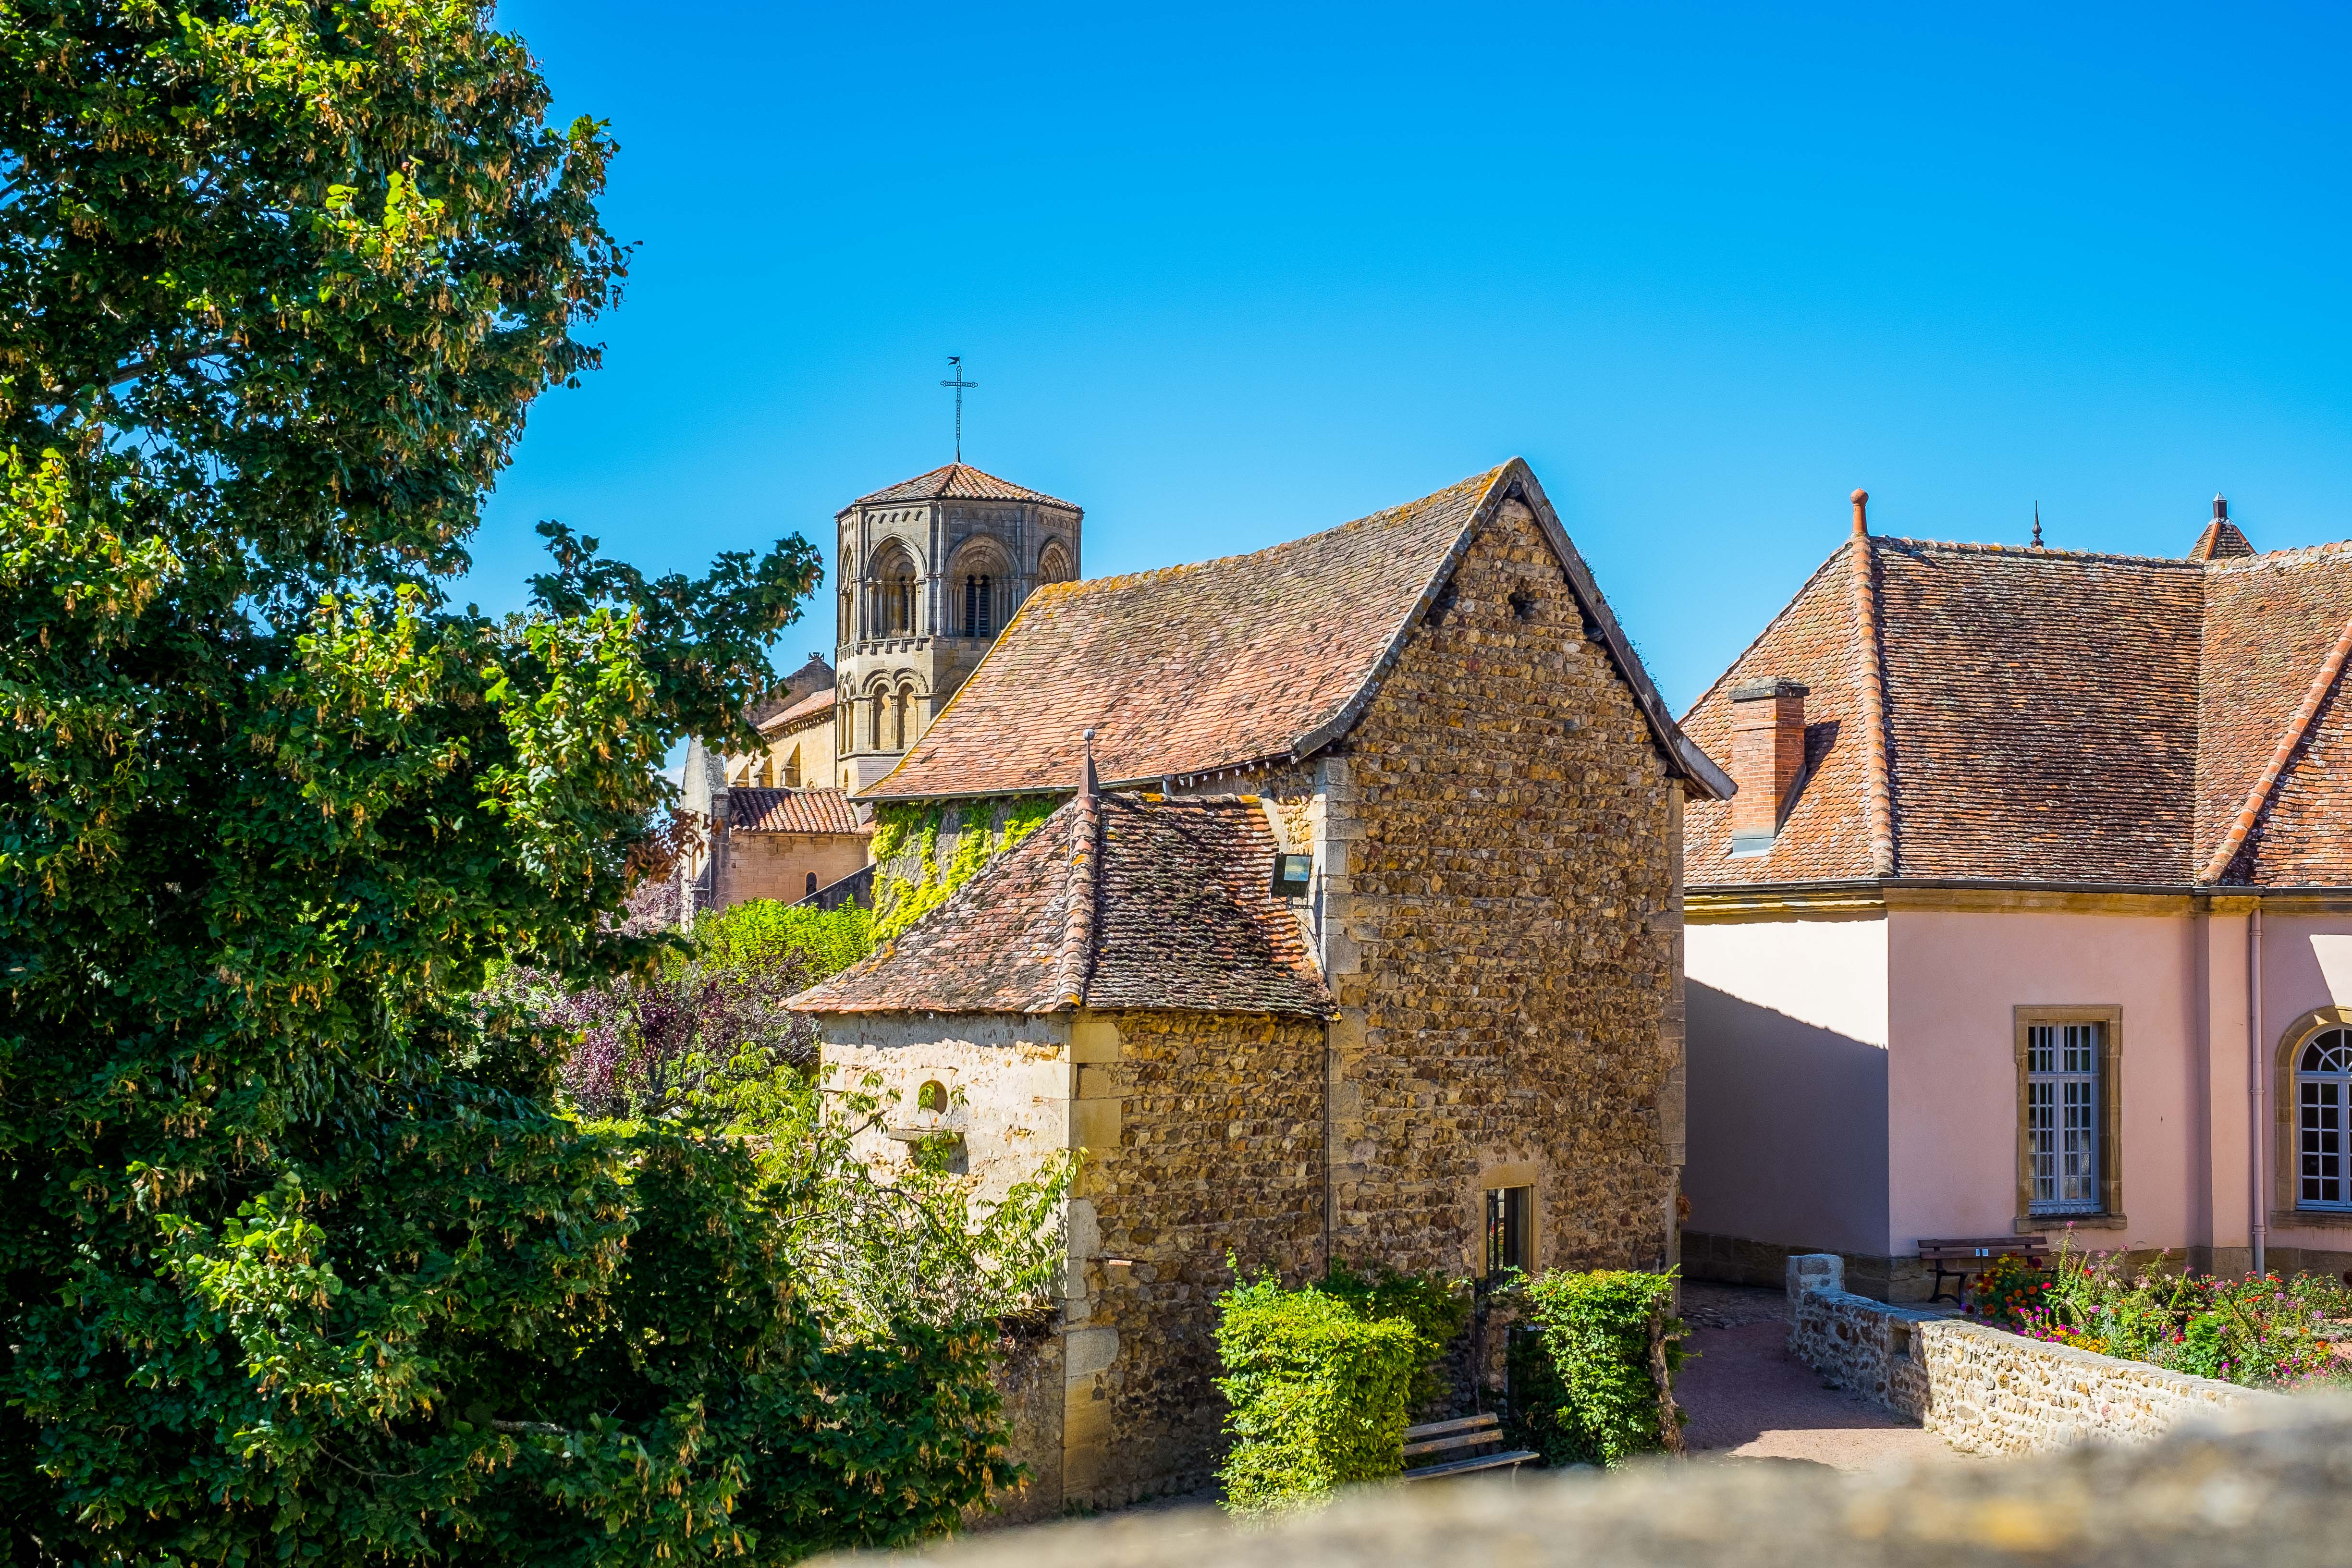 Semur-en-Bronnais -- one of the reasons to seek out these special villages...